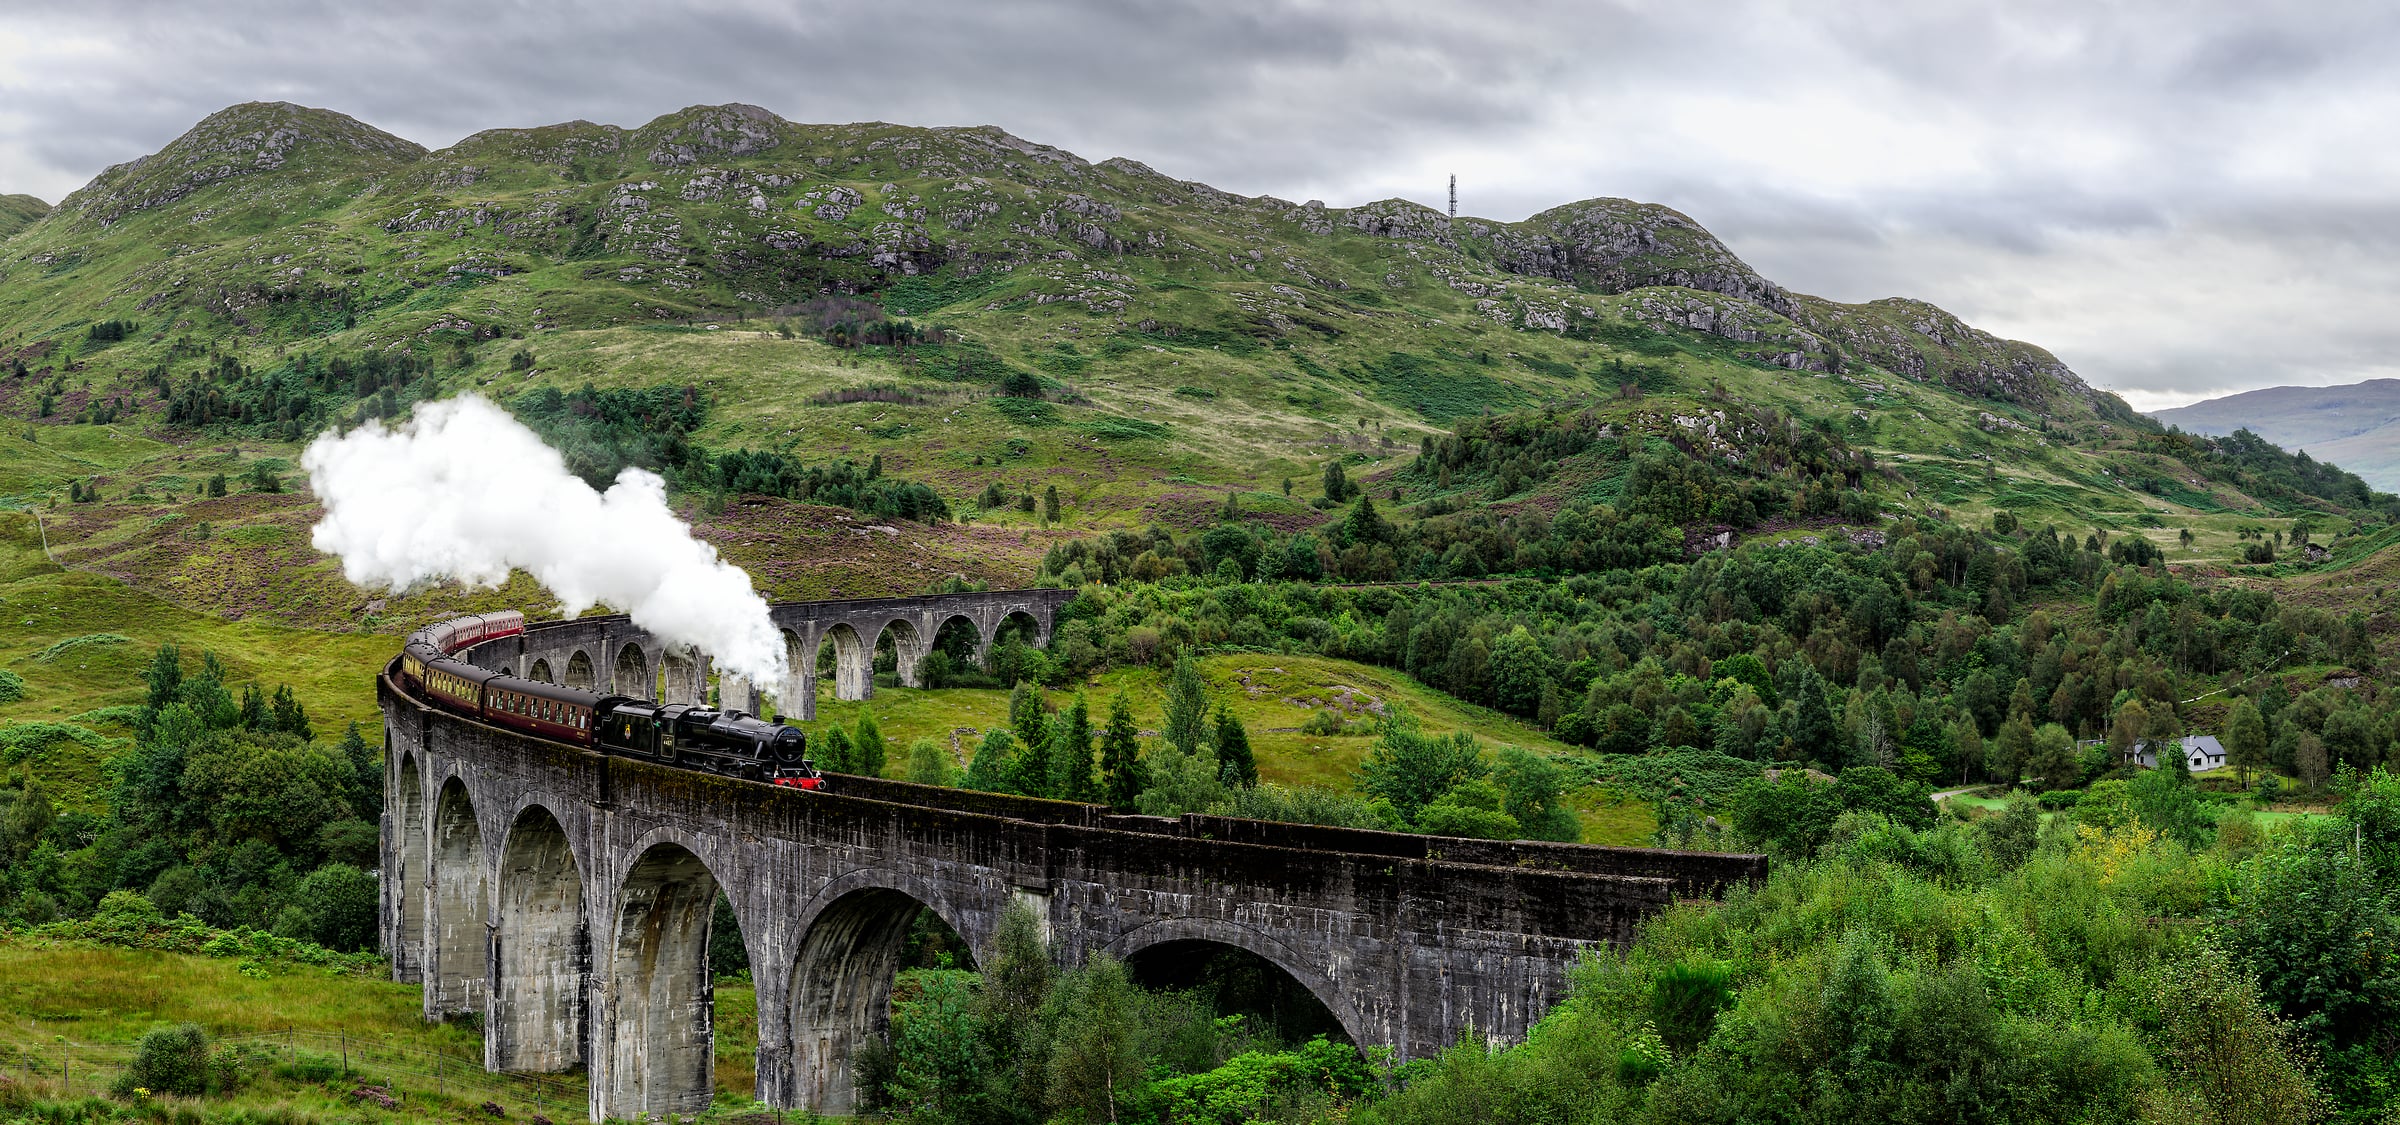 936 megapixels! A very high resolution, large-format VAST photo print of the Jacobite railroad train steam locomotive going across the Glenfinnan Viaduct railroad bridge; photograph created by Scott Dimond in Glenfinnan Viaduct, United Kingdom